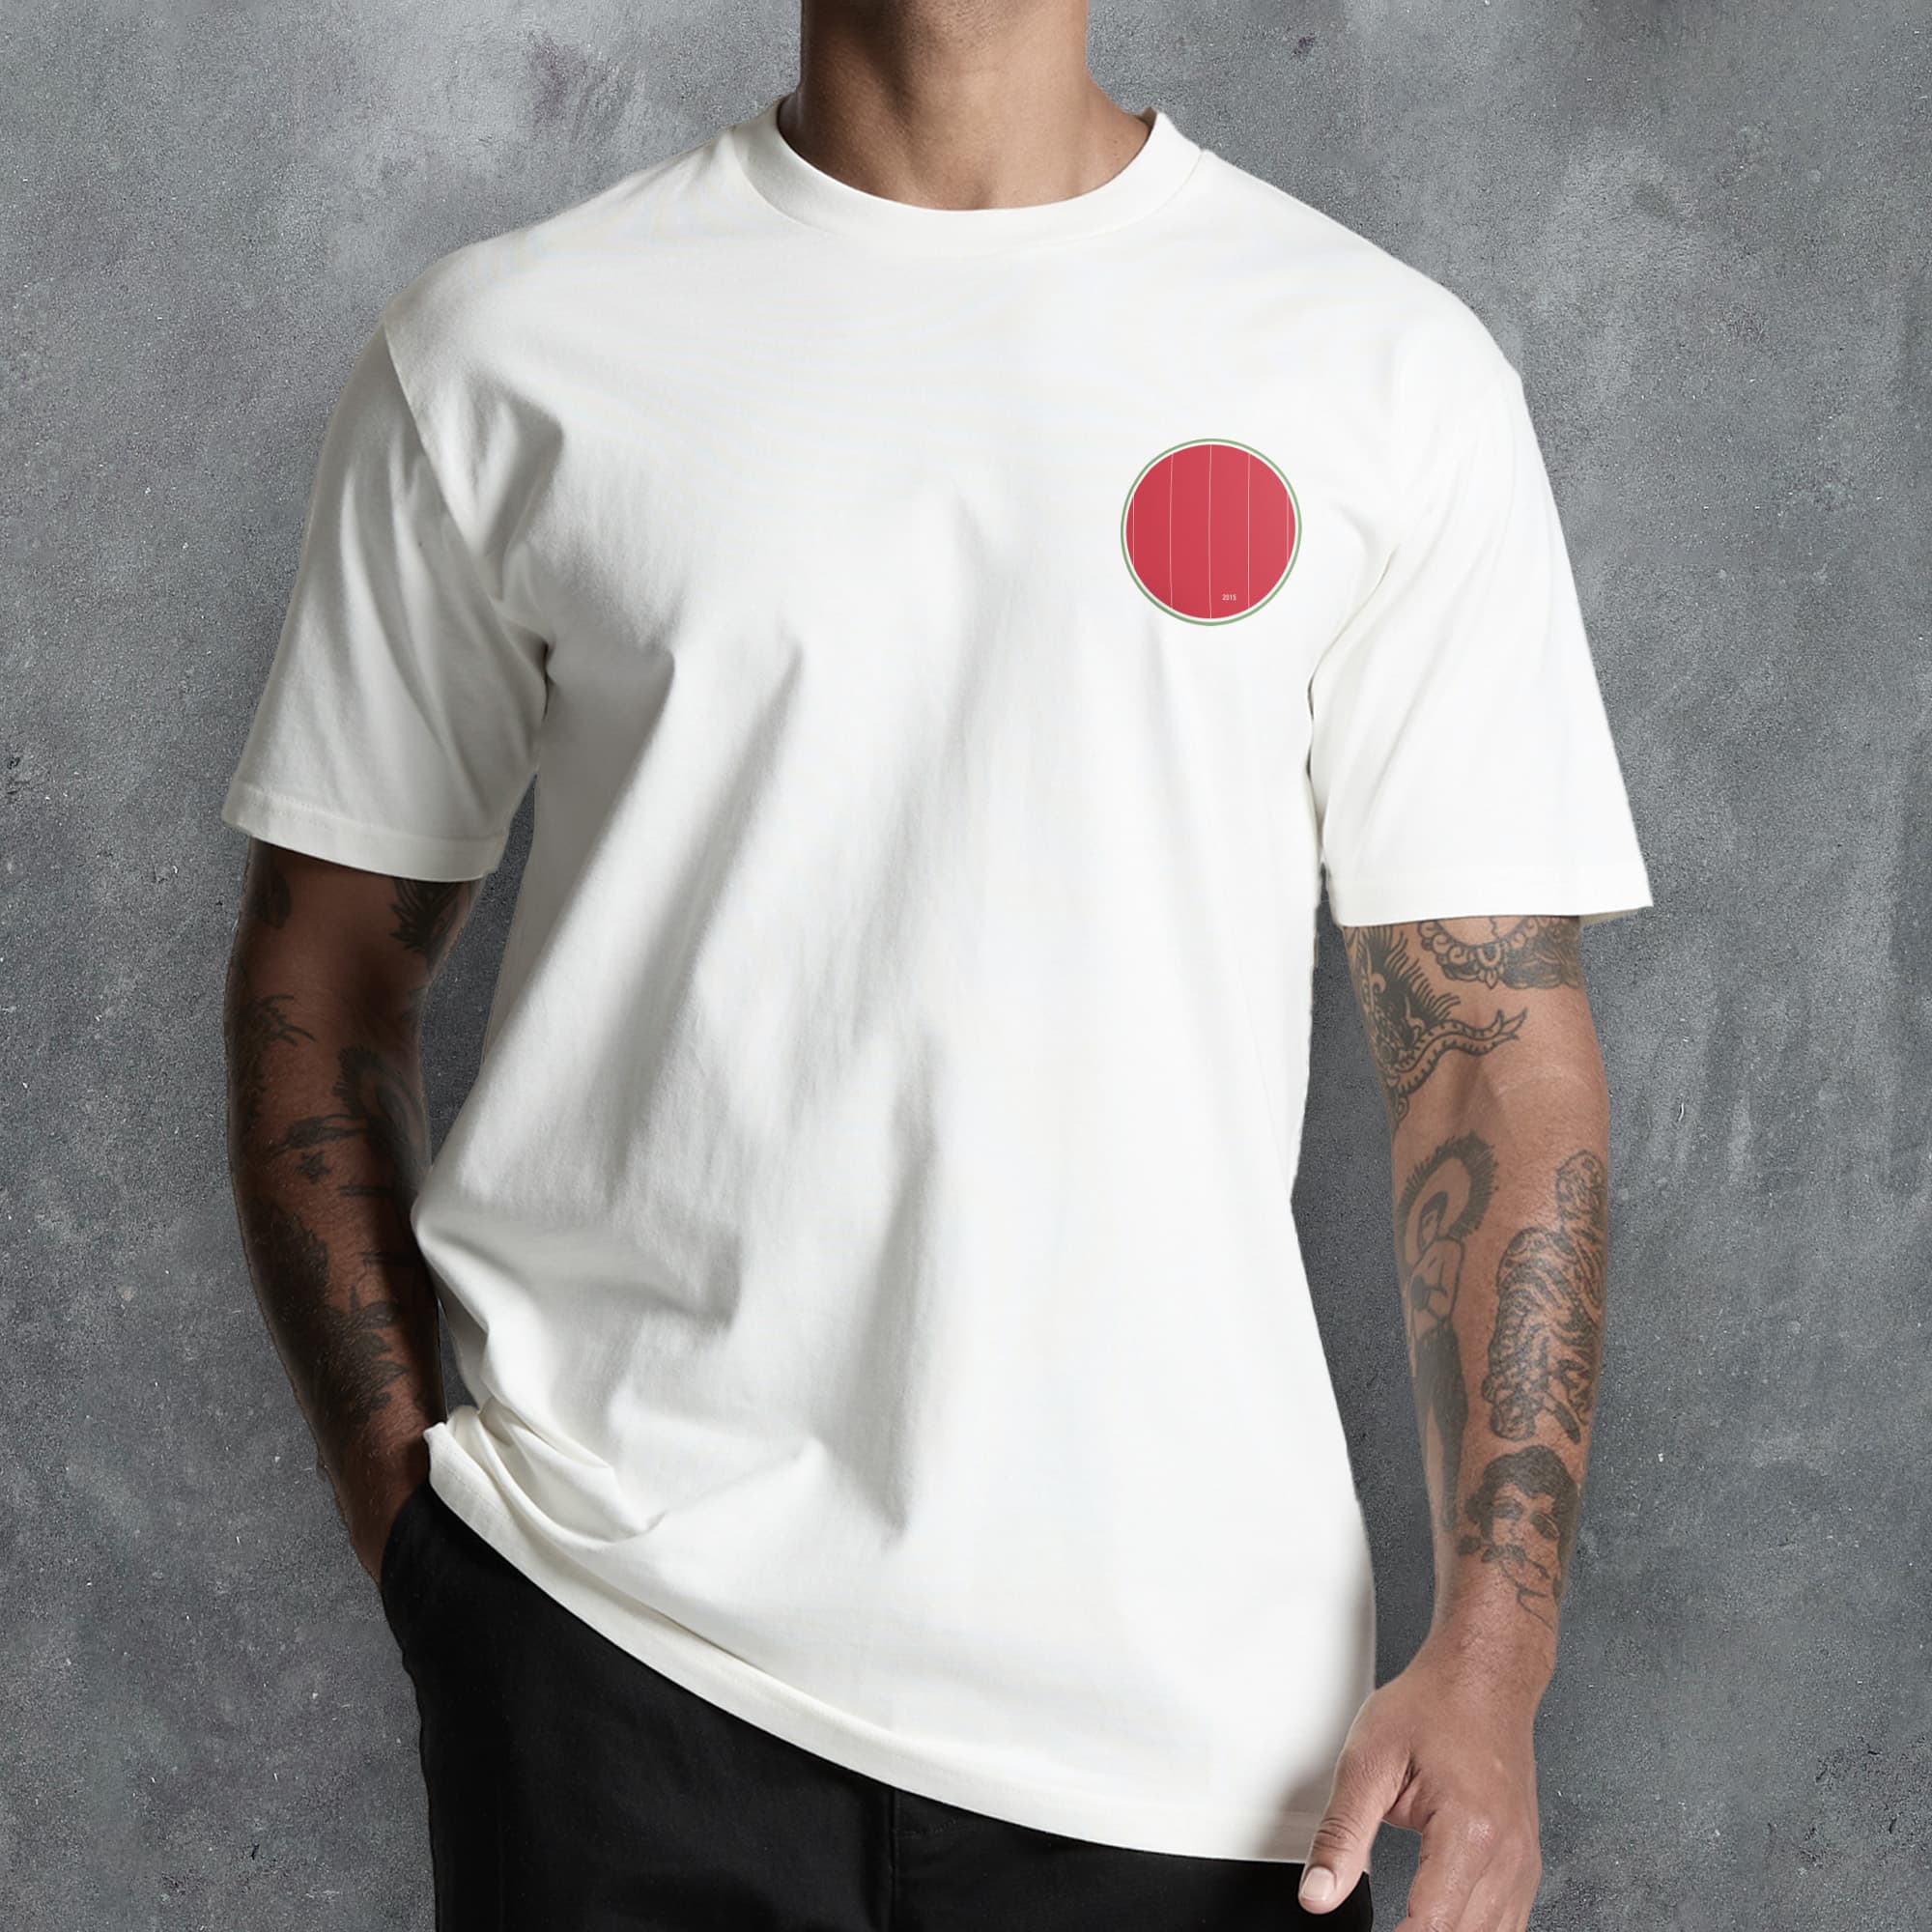 a man wearing a white t - shirt with a red circle on it